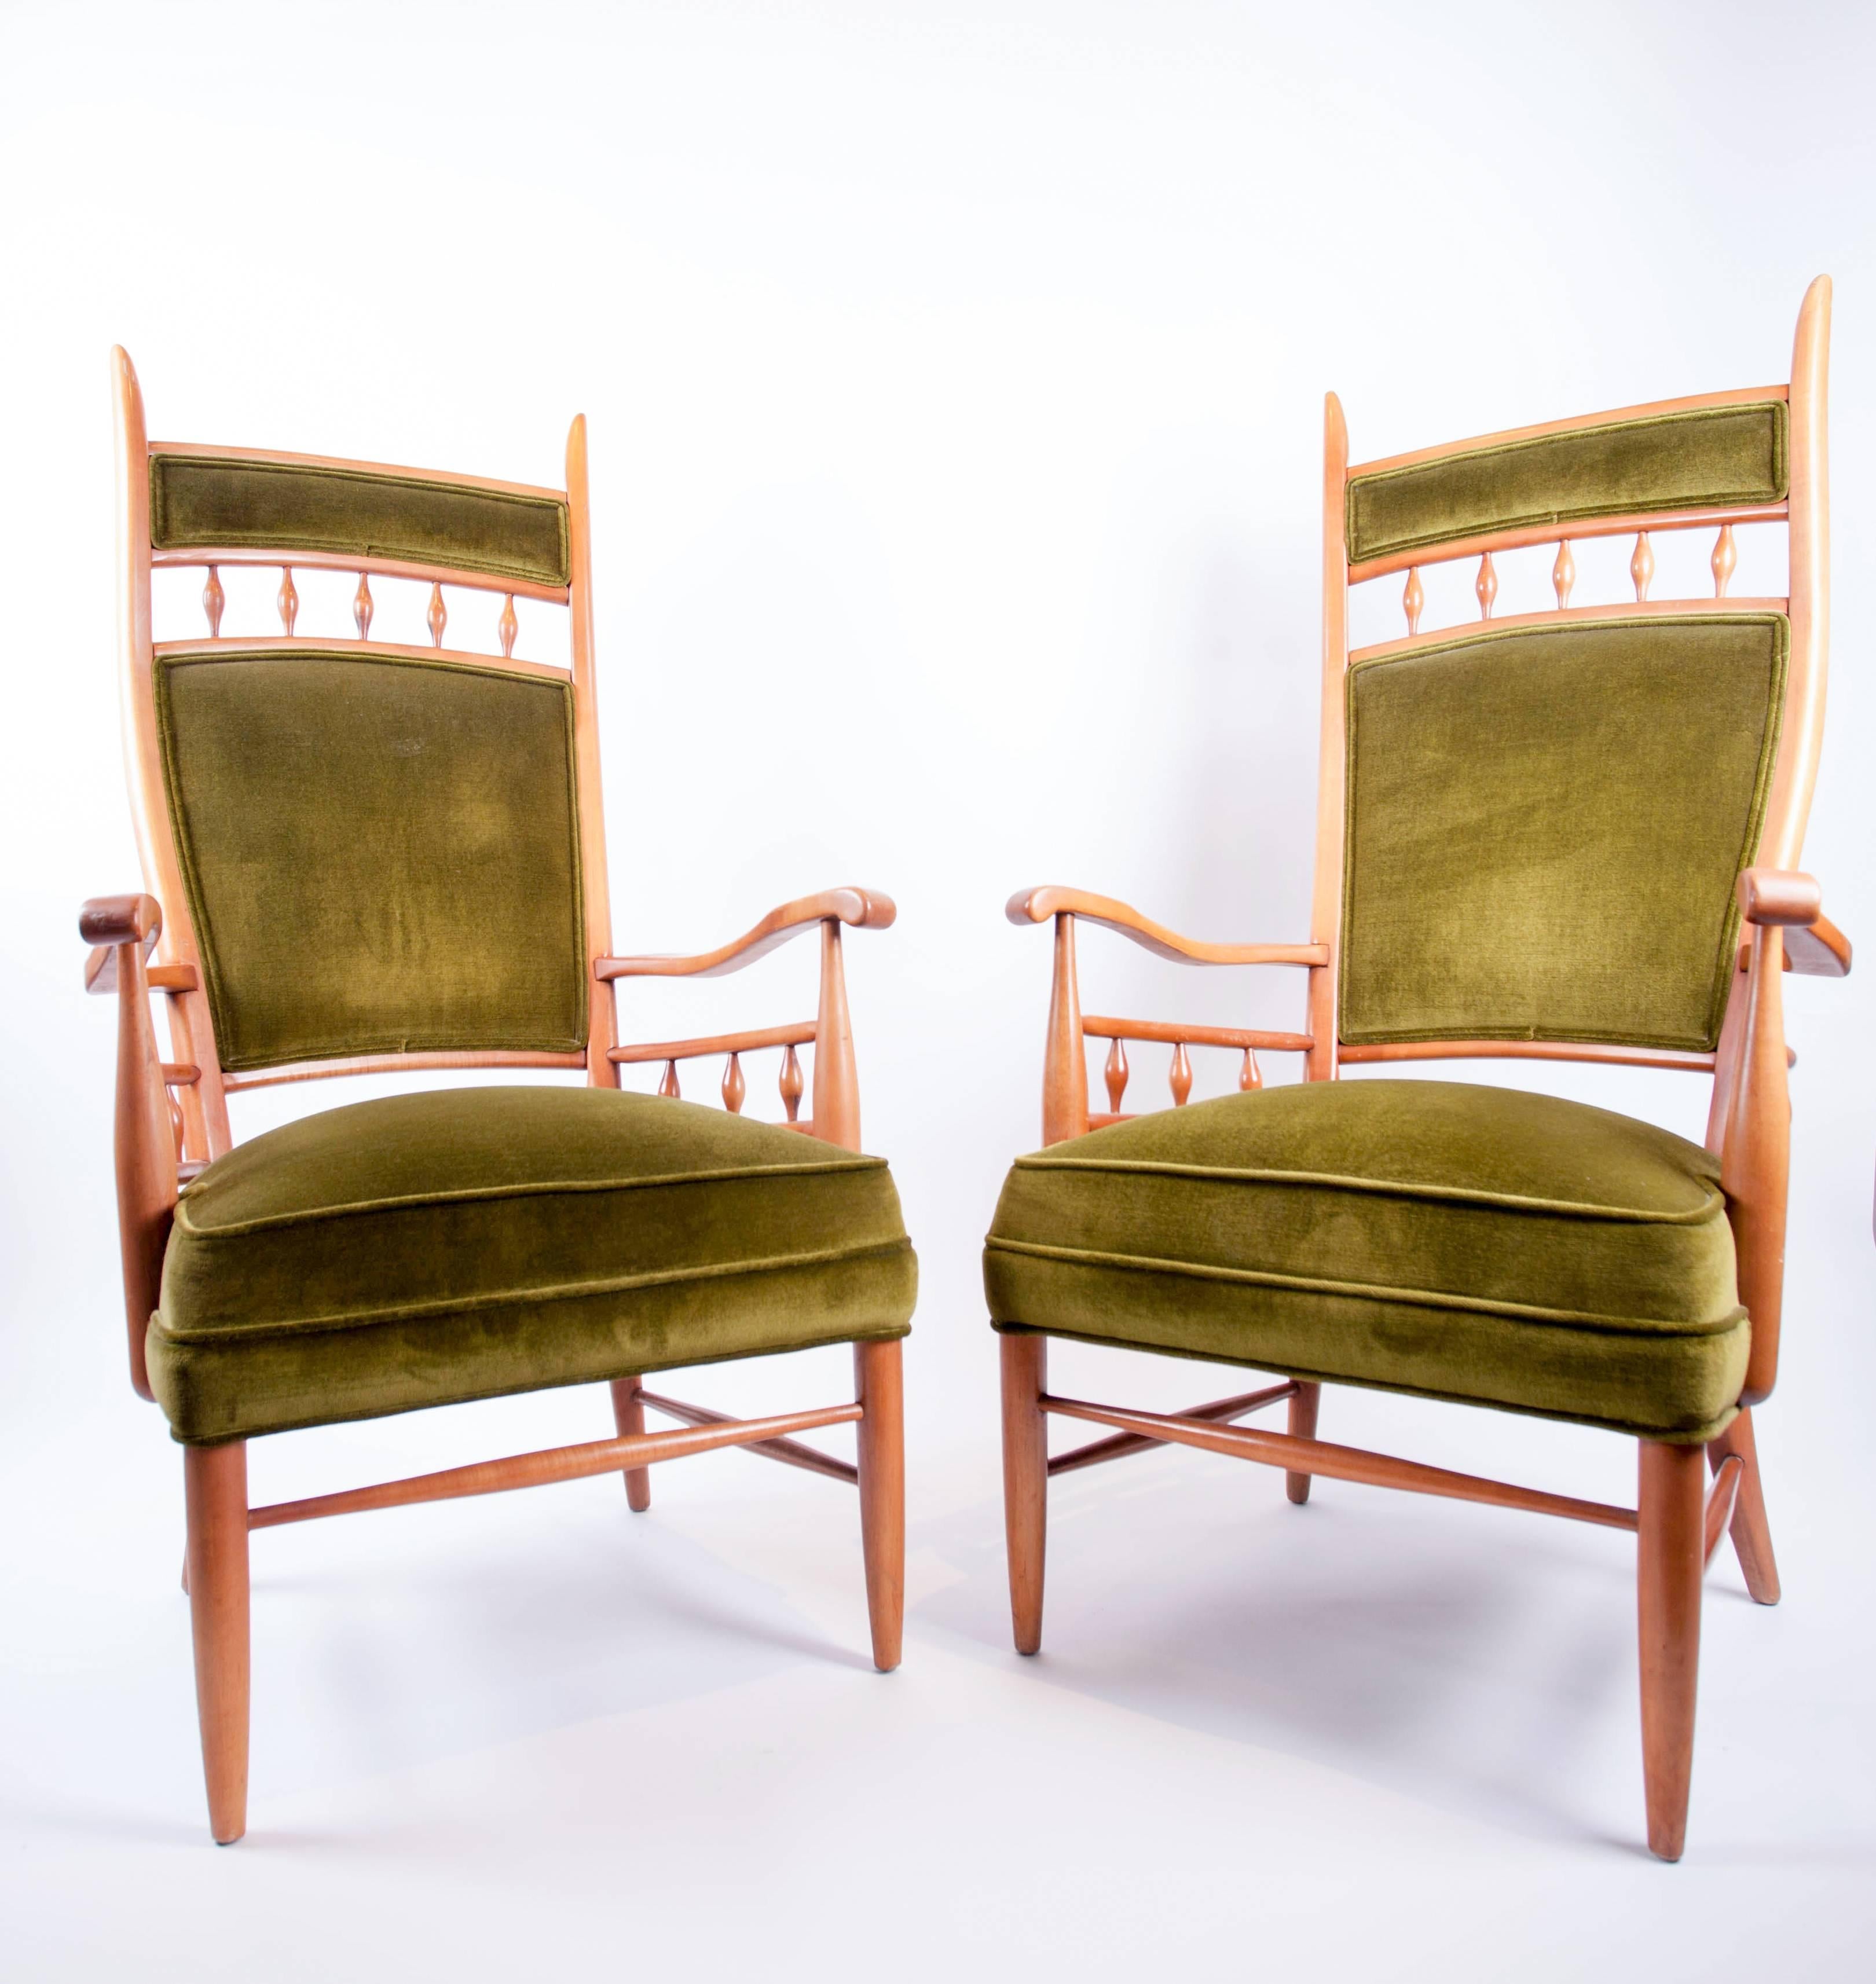 A fanciful pair of tall, fruitwood framed armchairs in the style of Edward Wormley for Dunbar. Manufactured by Maxwell Royal. Circa 1950s.  This pair has turned spindles under the arms and below the back rail. The pair is being sold in vintage